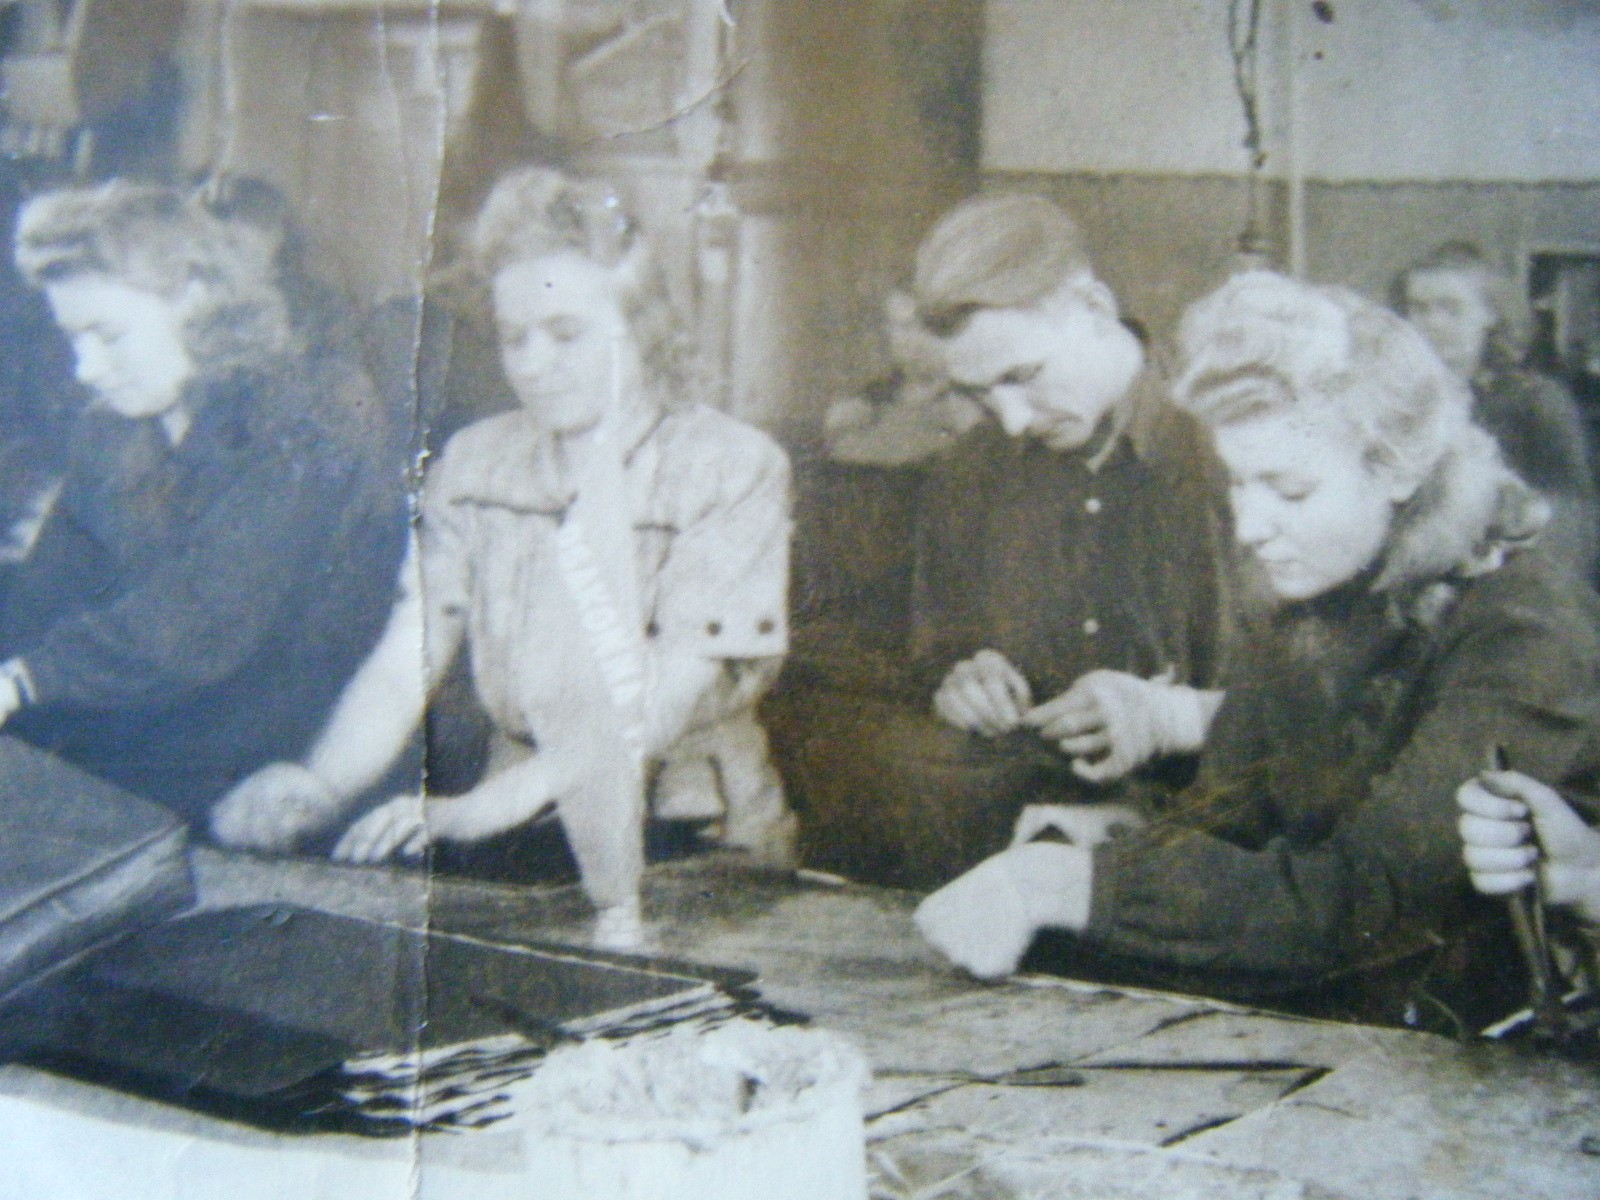 Tartu Leather Combinate (where leather works were made) in 1952. From the right first Silvia-Agathe Brant